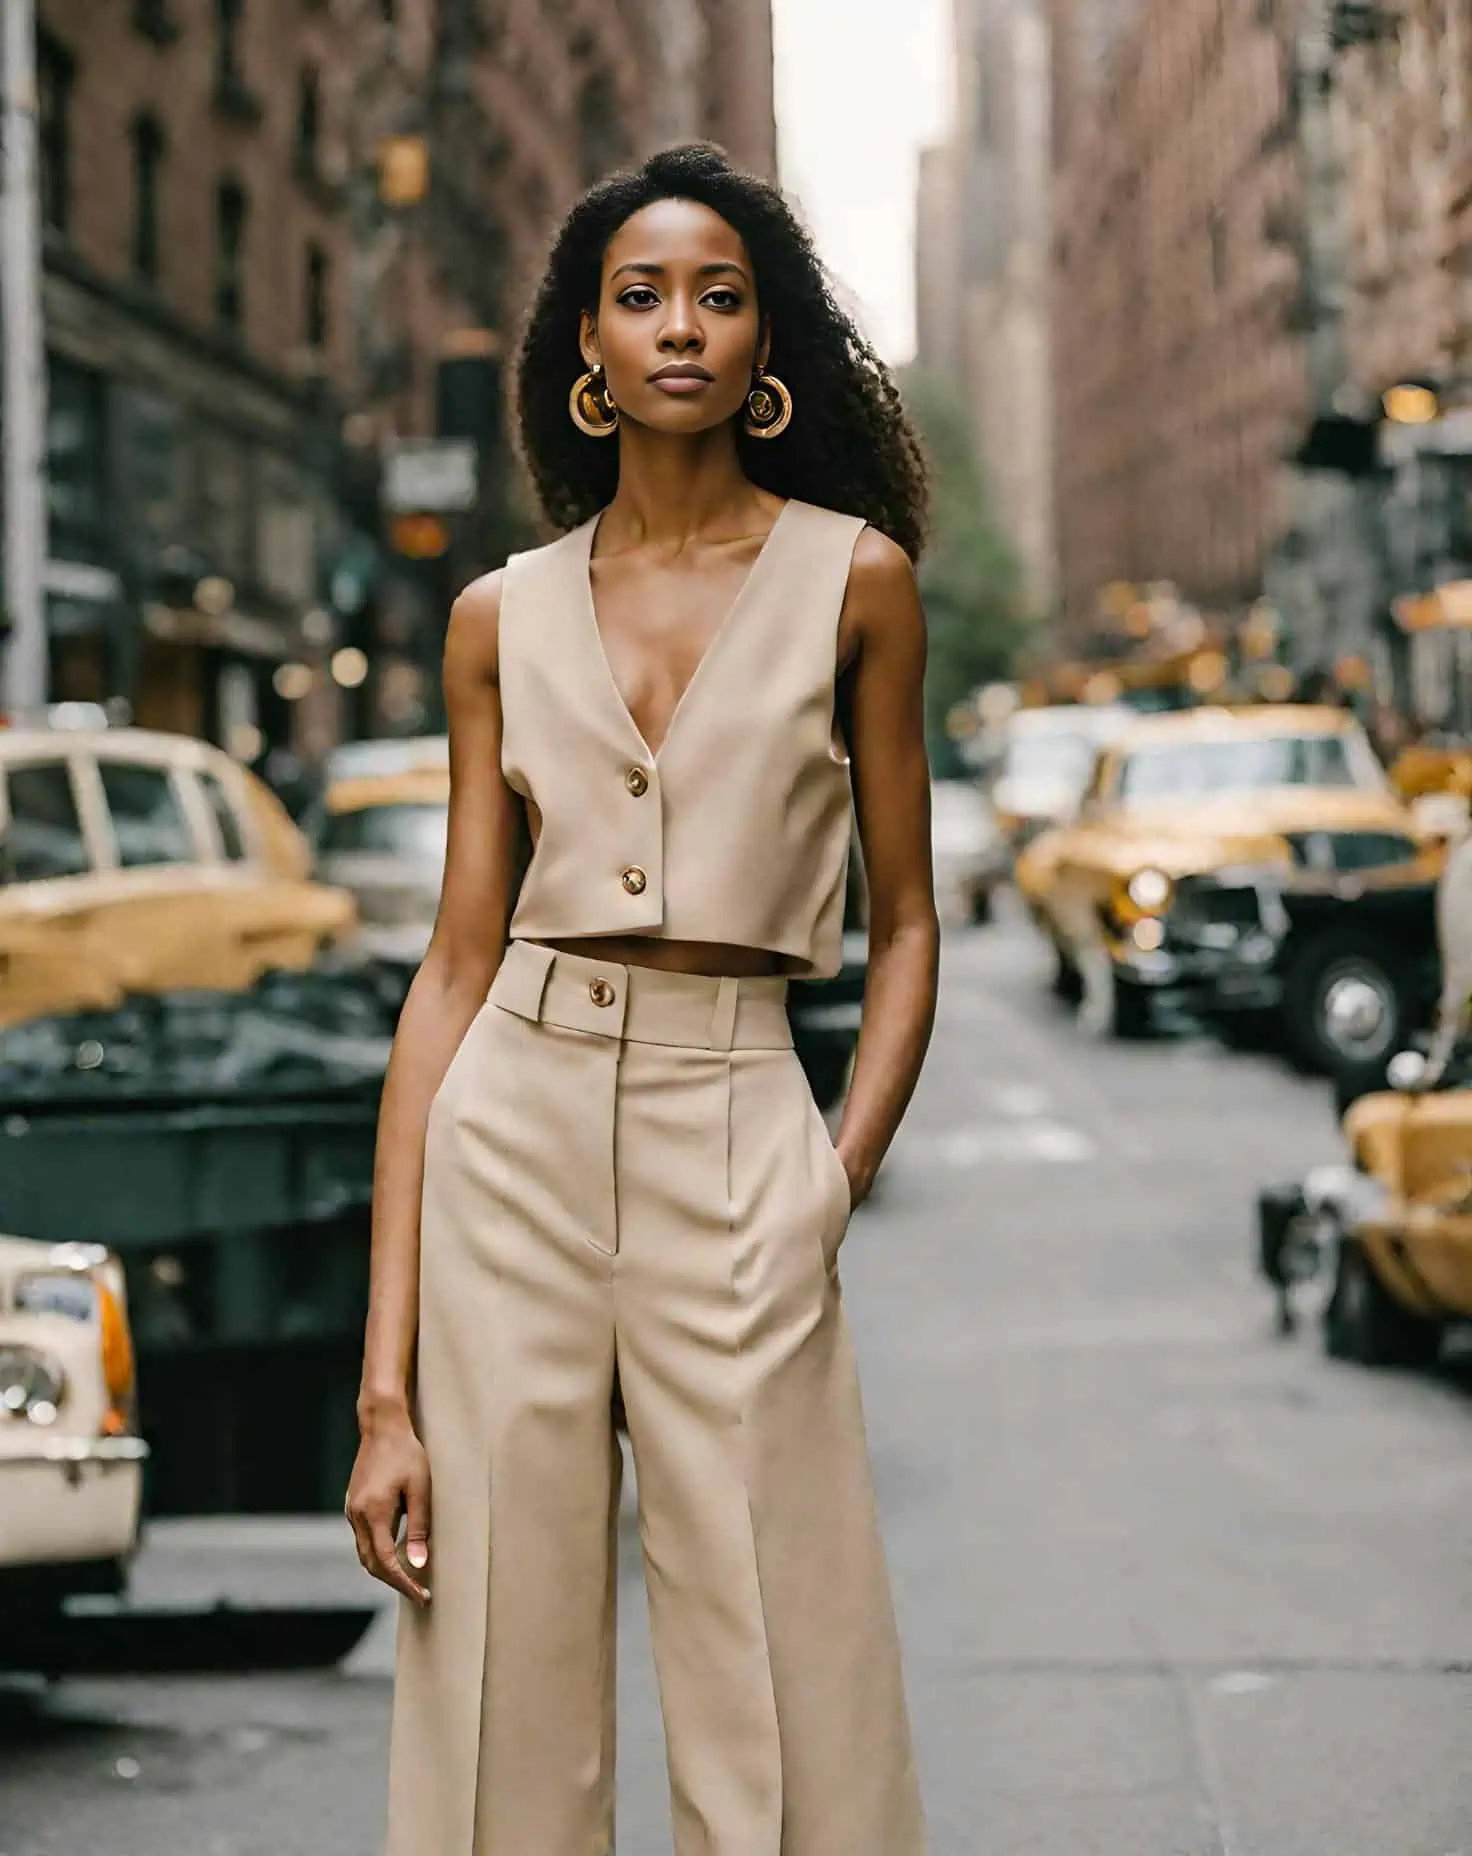 How To Wear Palazzo Pants Well - Vanguard Allure